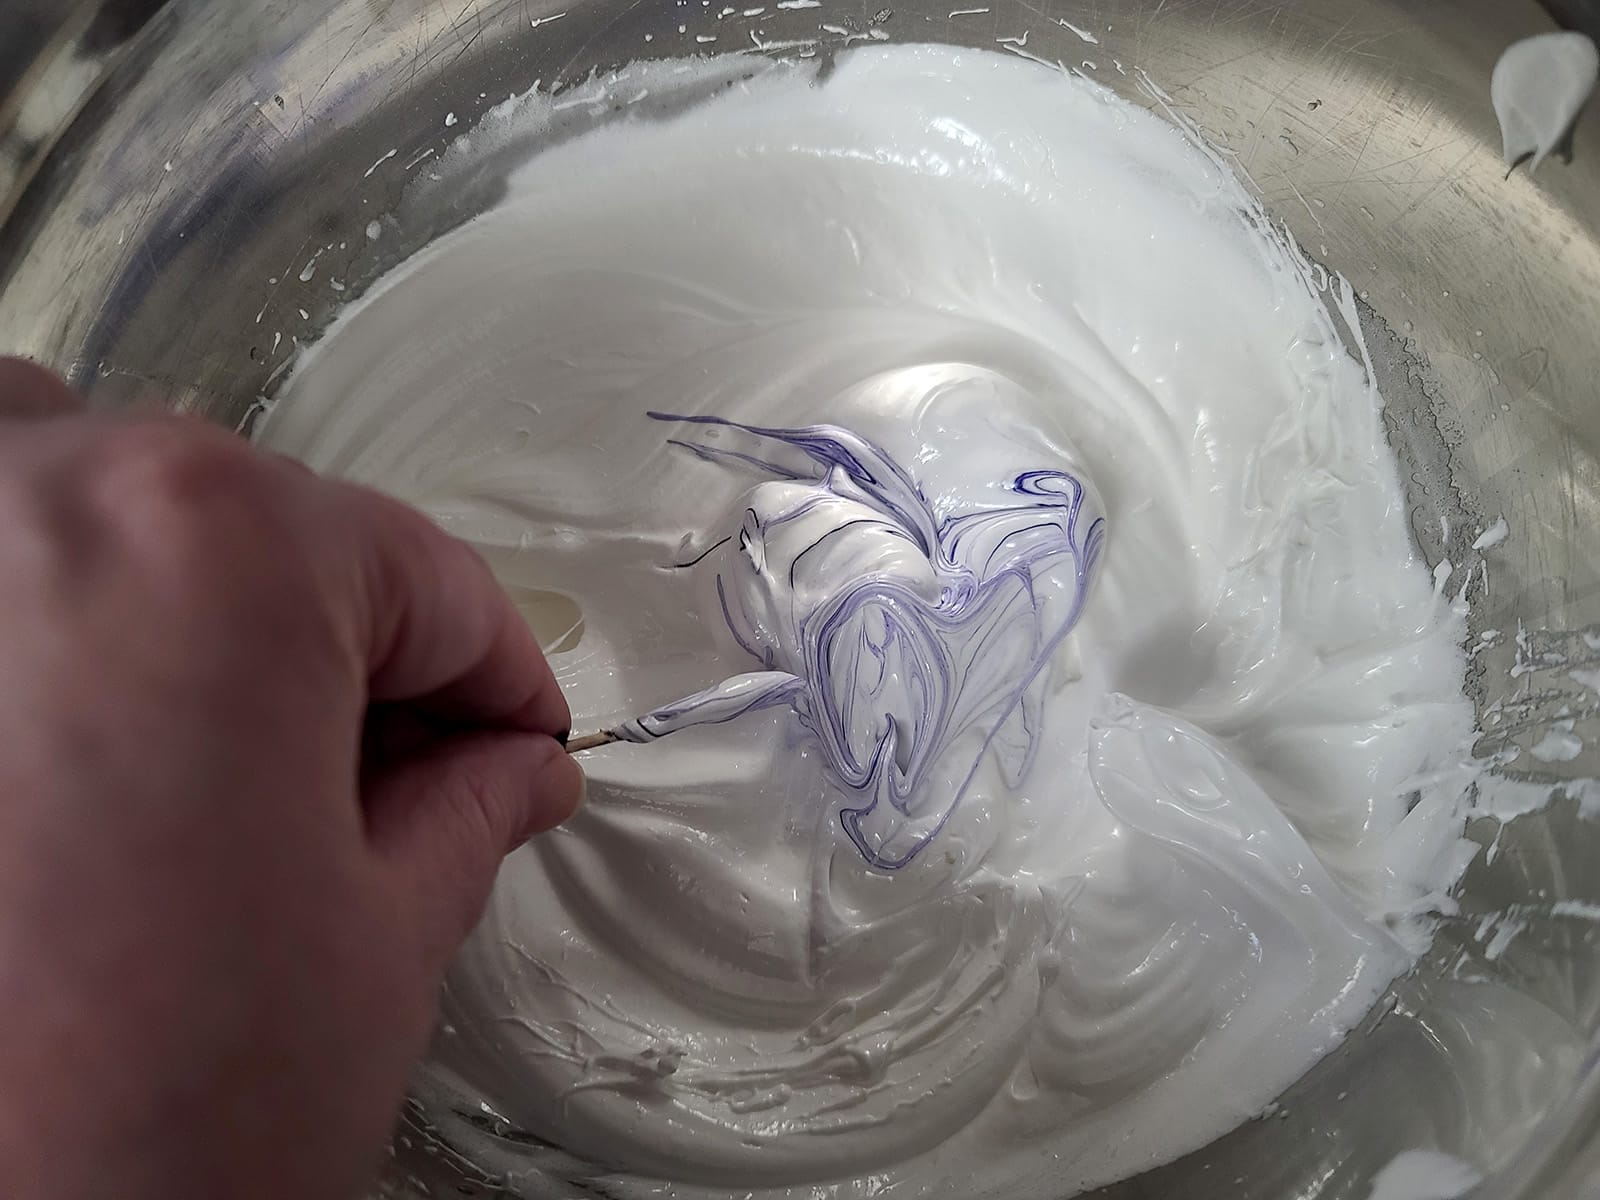 Purple food colouring being swirled into the whipped egg whites.